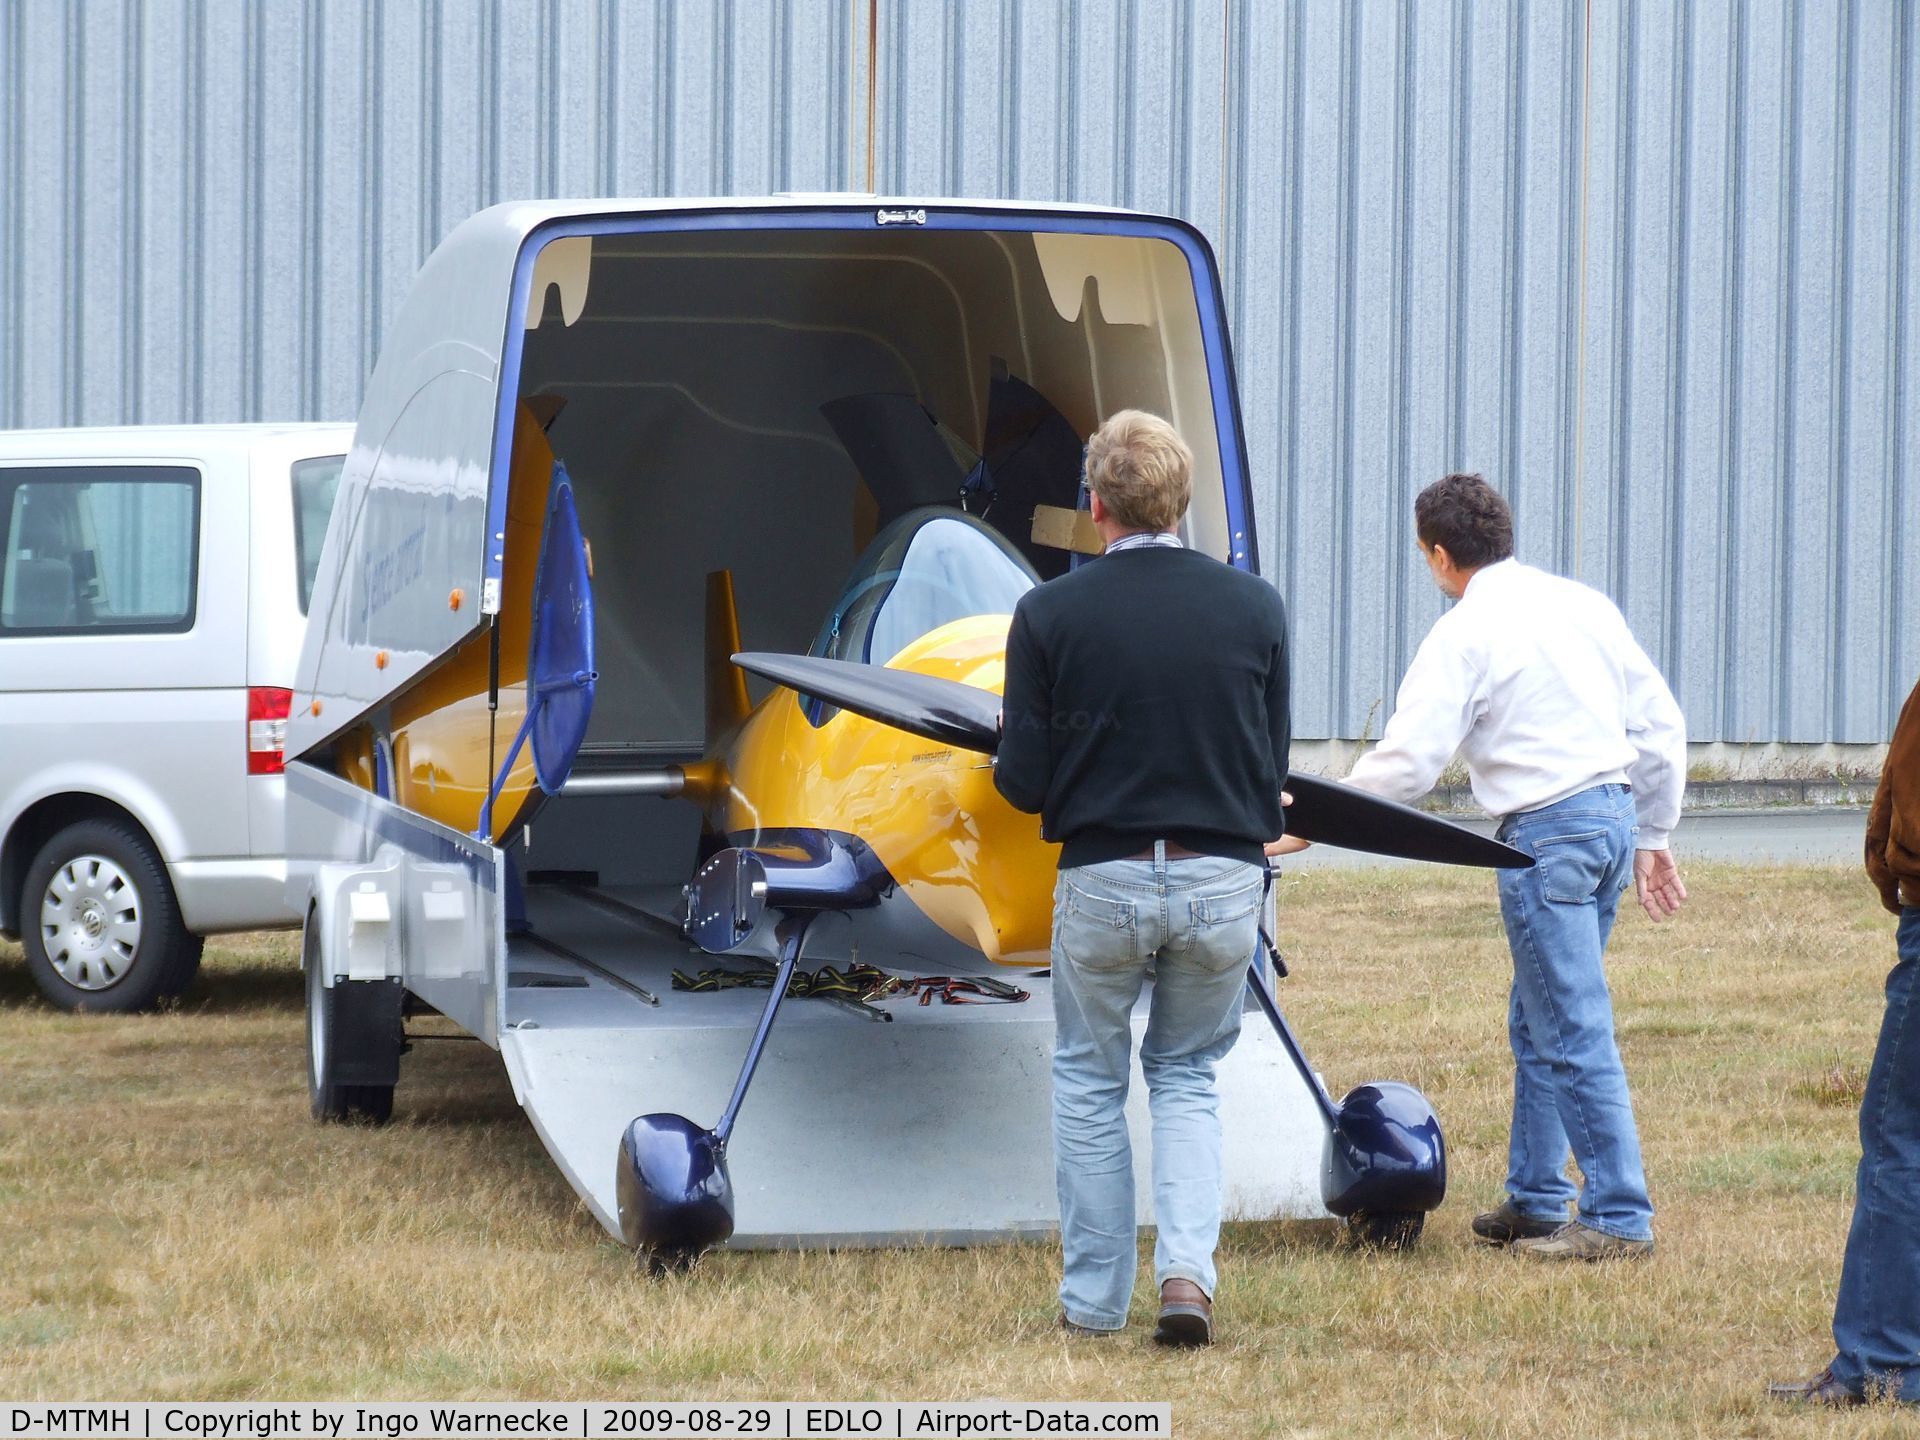 D-MTMH, 2000 Silence Twister C/N 001, Silence Twister prototype being unloaded from the company trailer at the 2009 OUV-Meeting at Oerlinghausen airfield